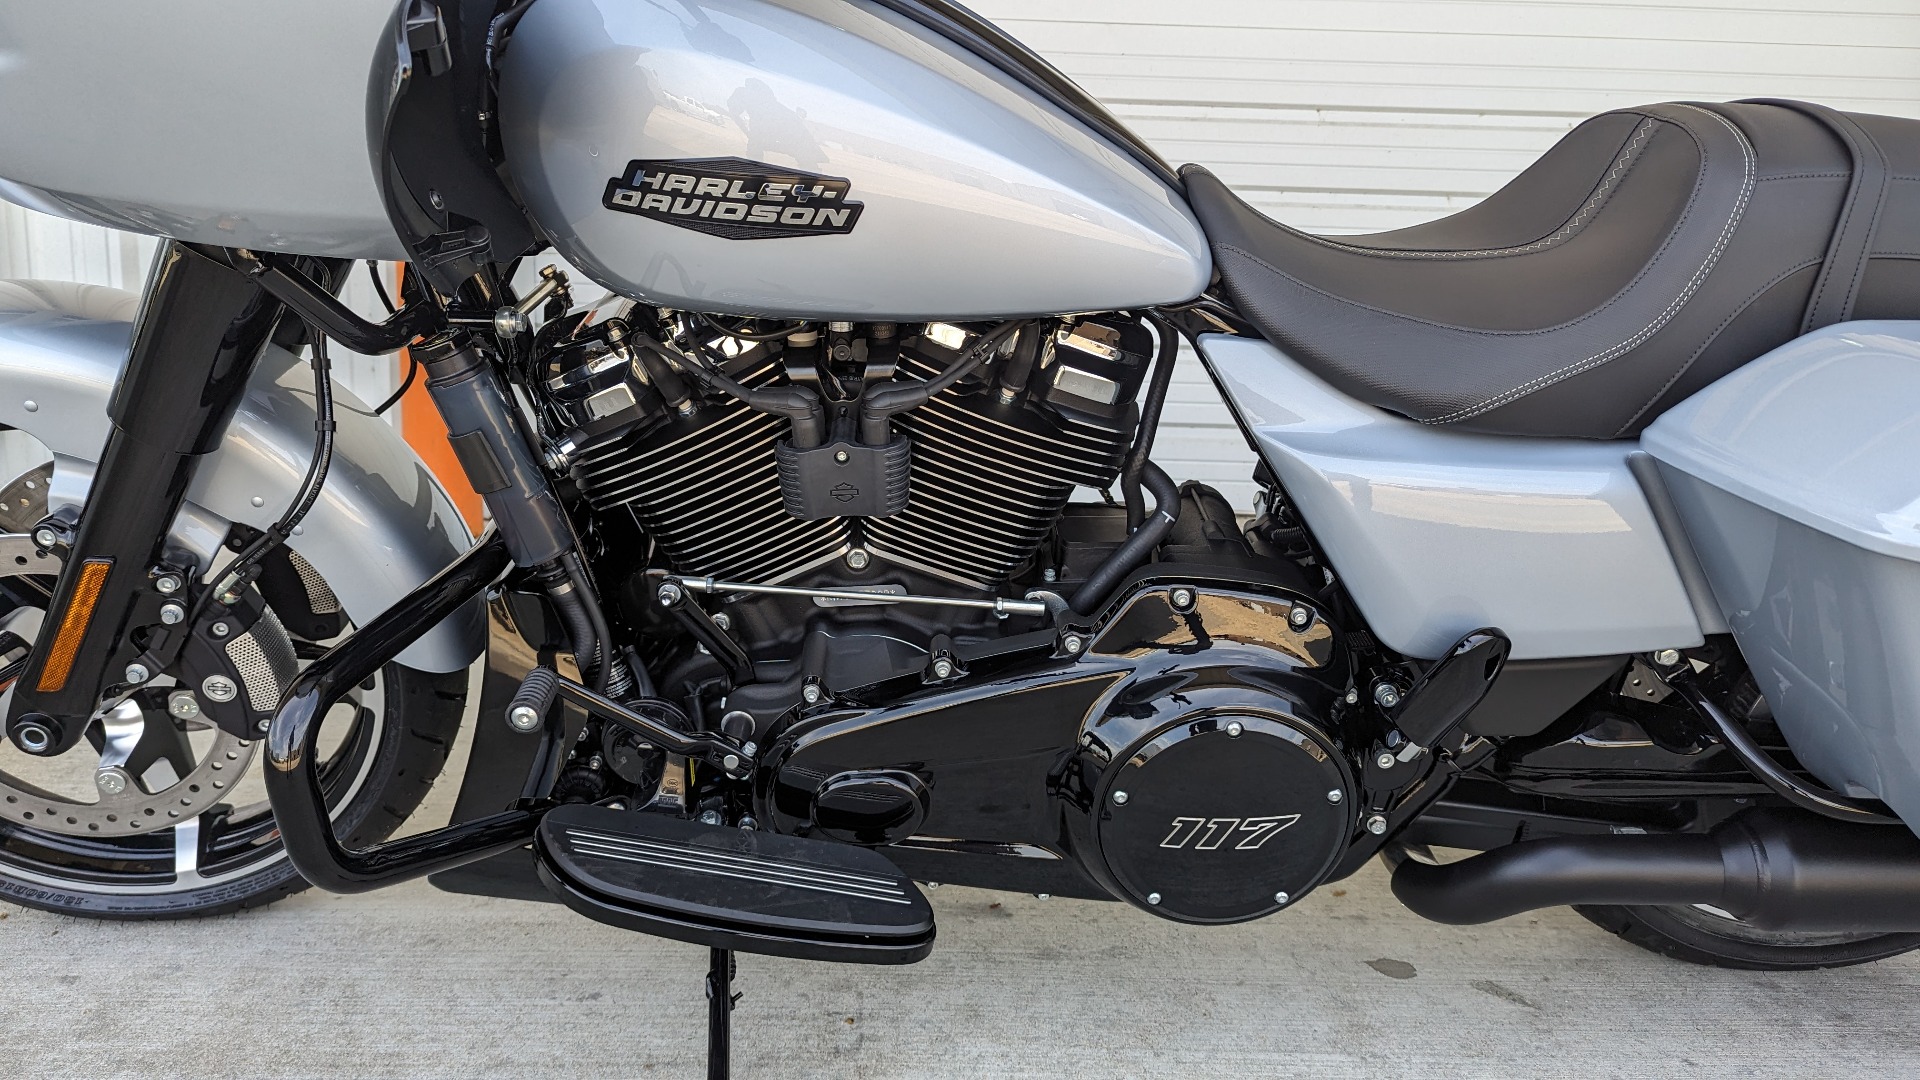 new 2024 harley davidson road glide in atlas silver and black for sale in texas - Photo 7